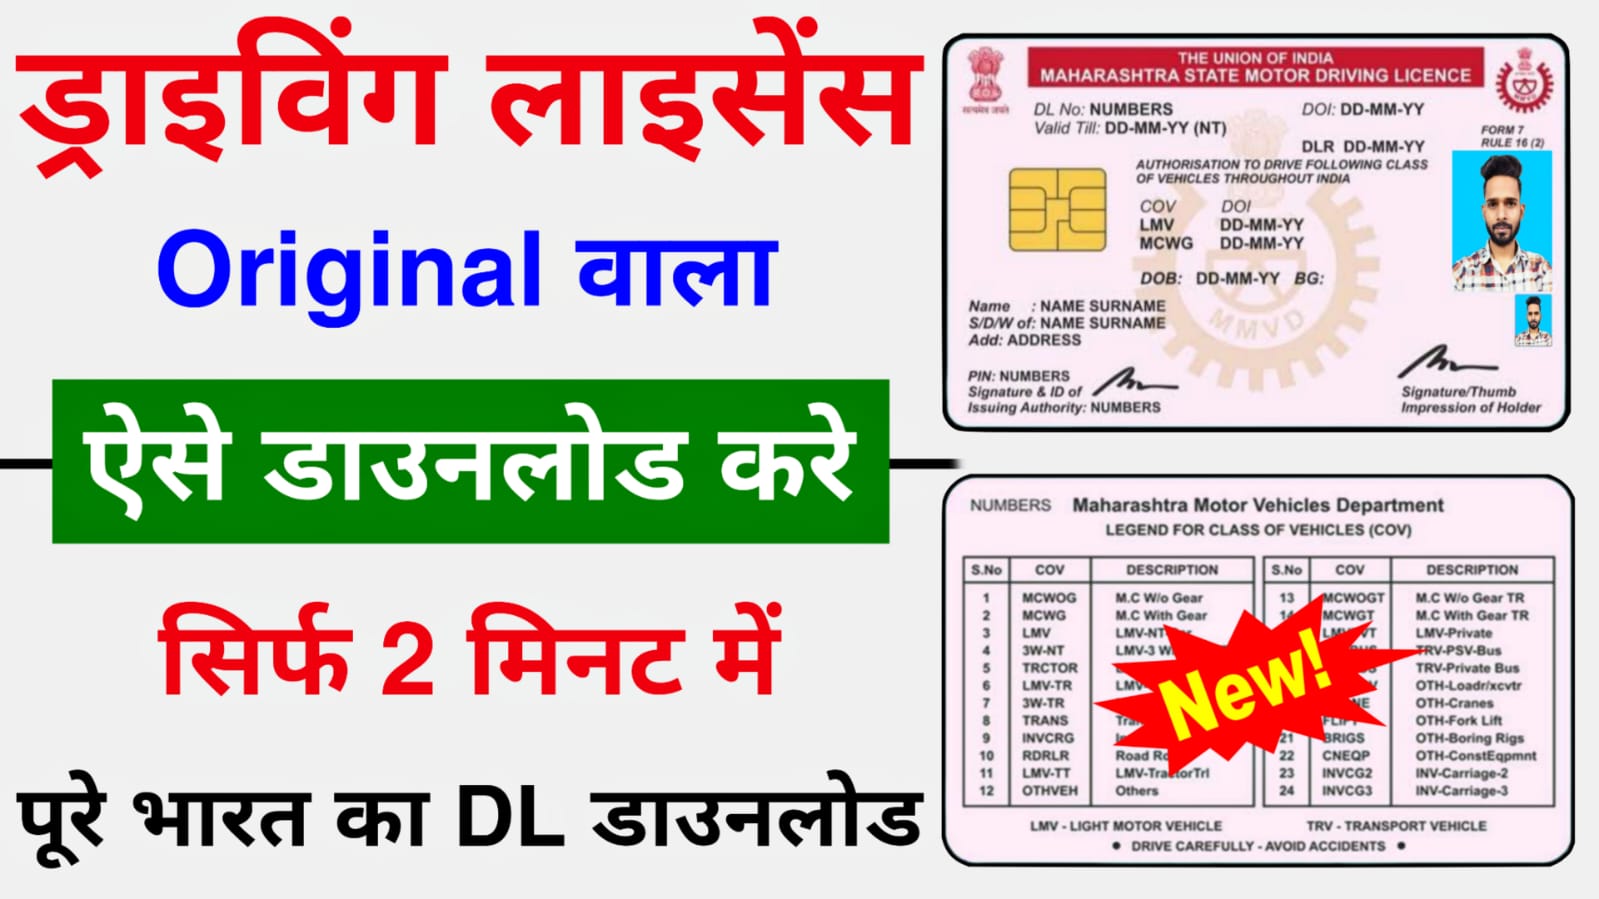 Driving License Download